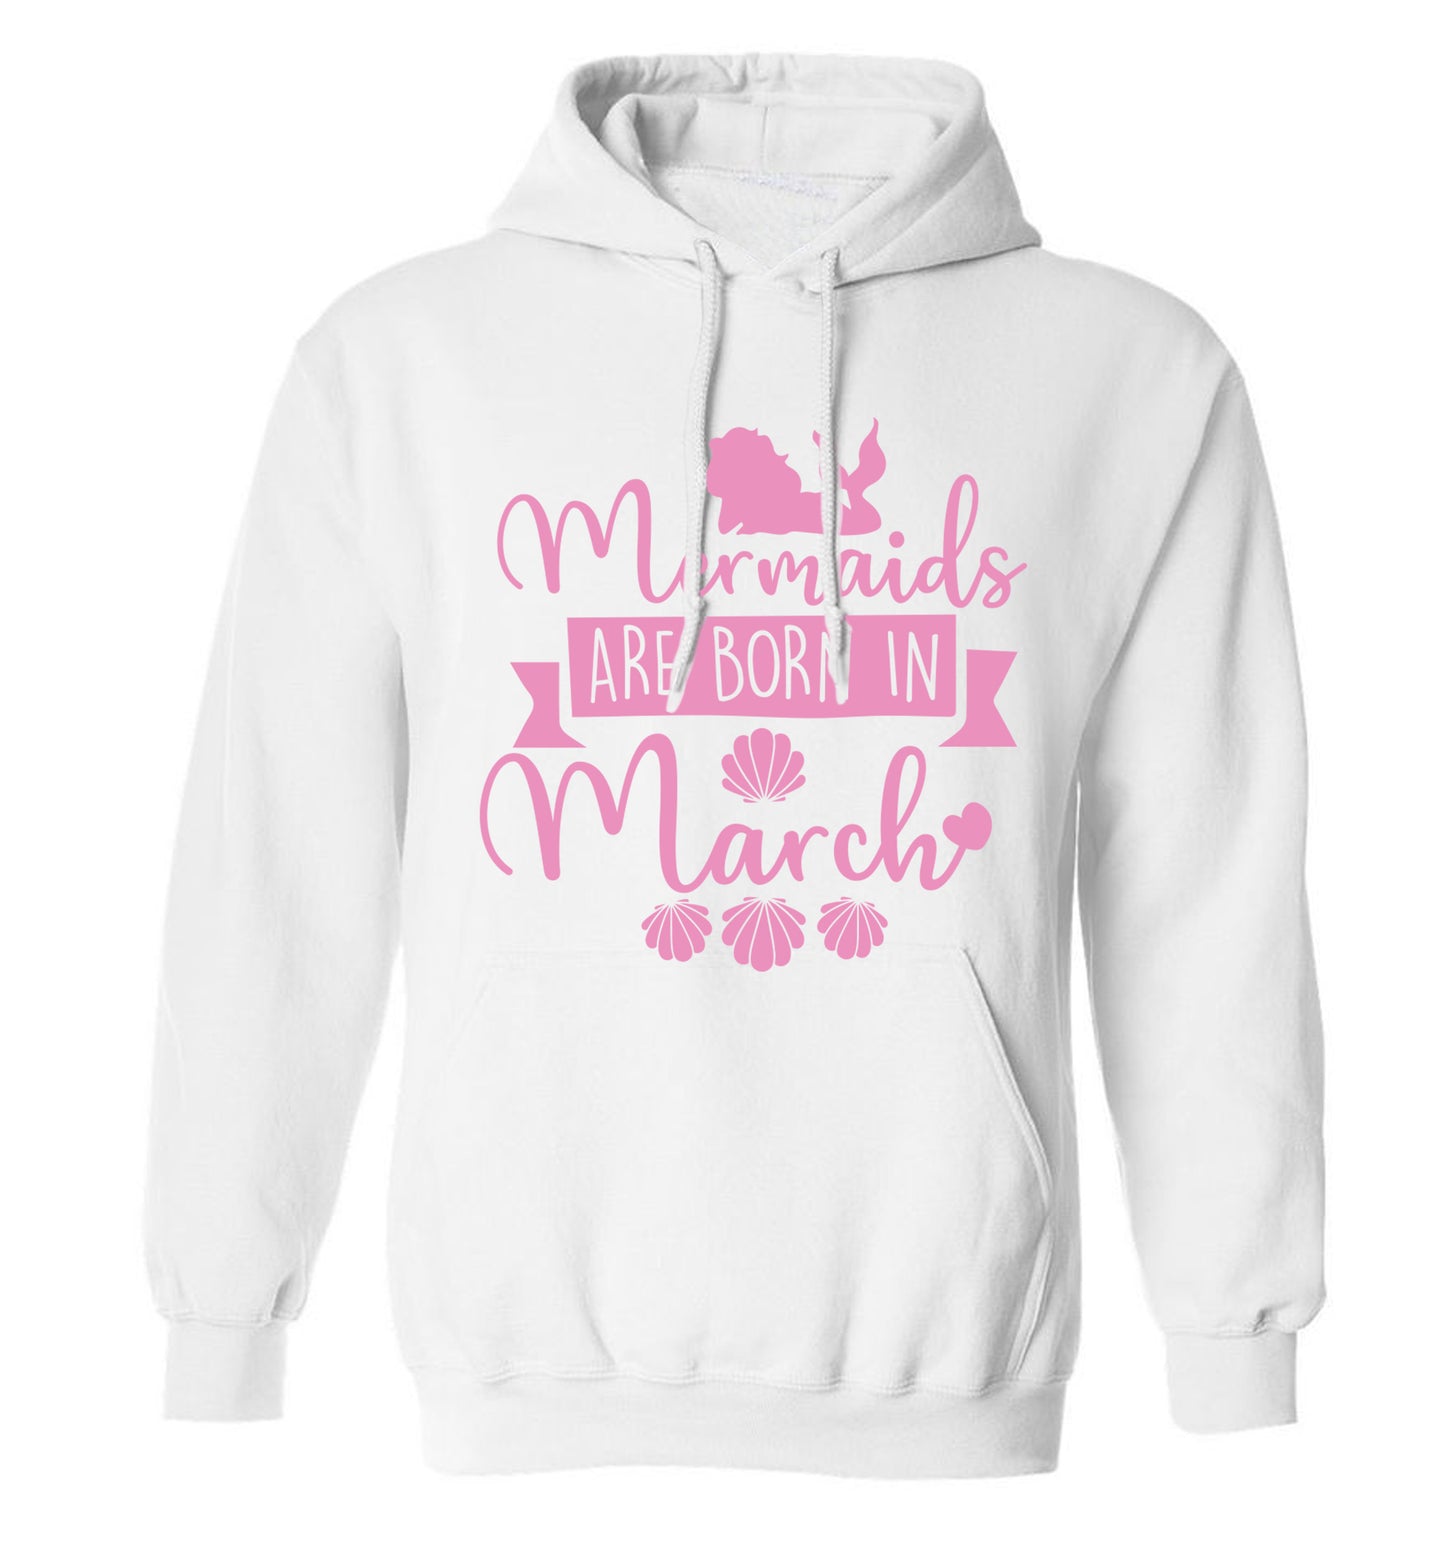 Mermaids are born in March adults unisex white hoodie 2XL